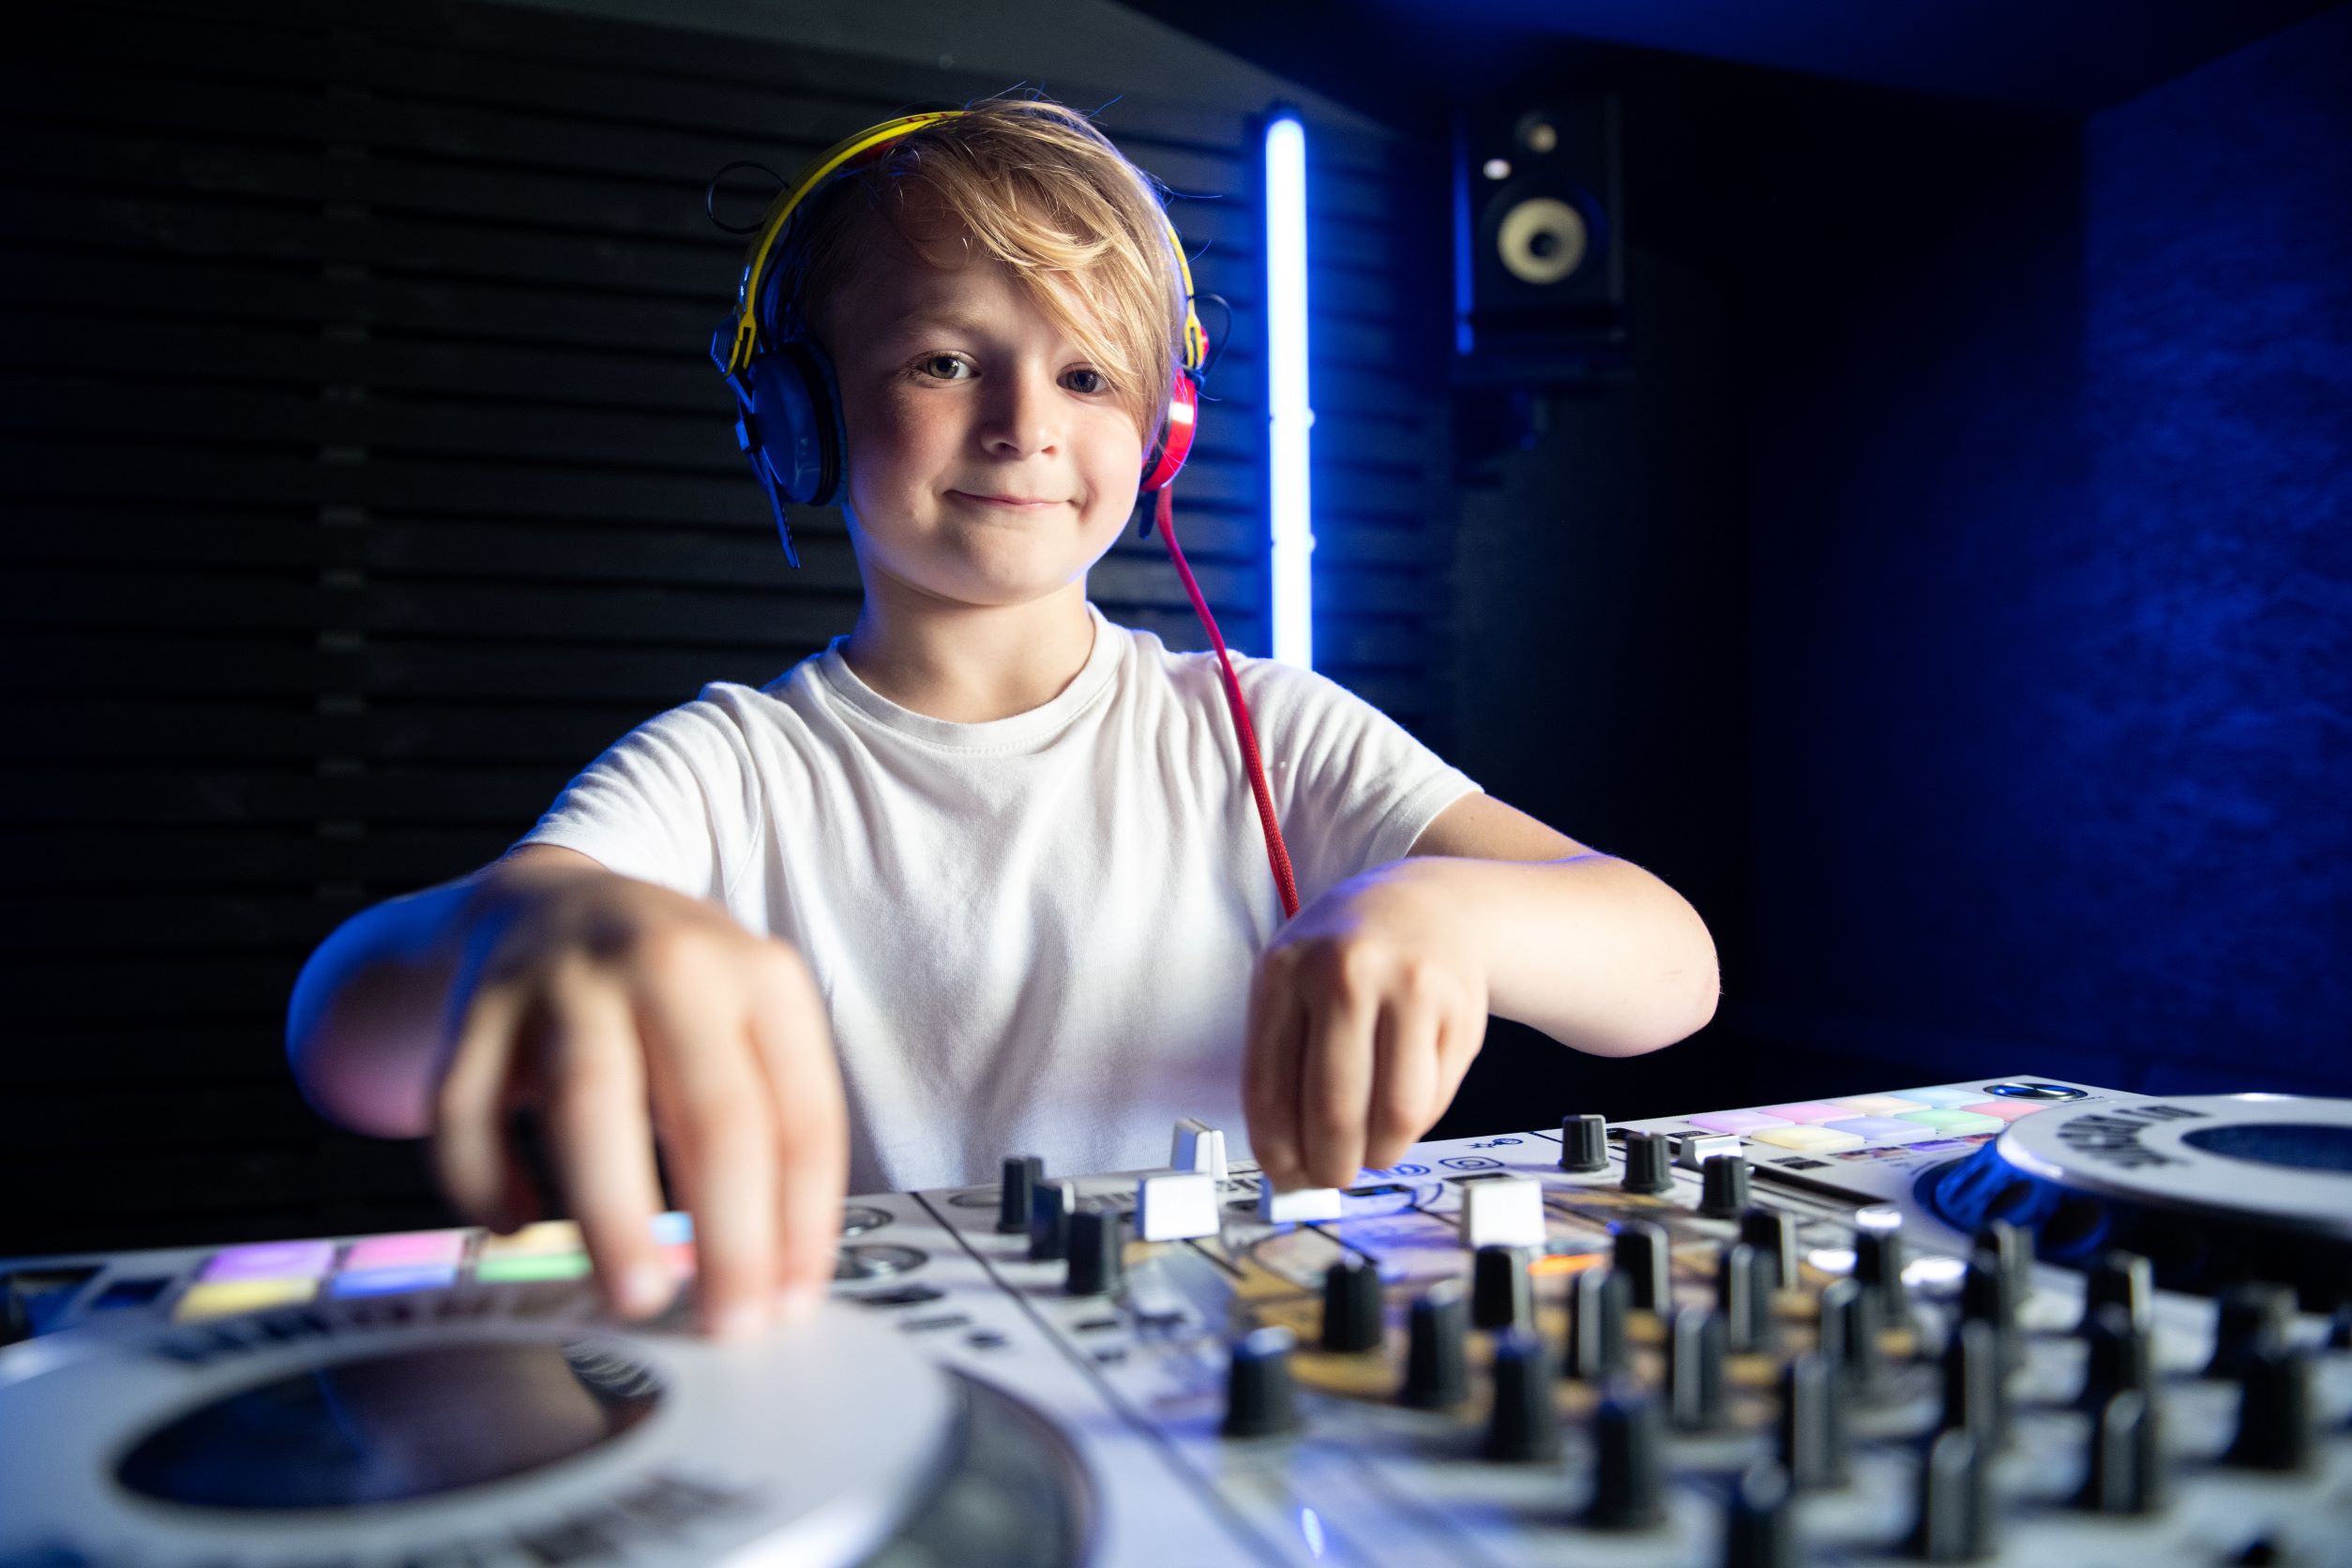 How old is the youngest DJ?